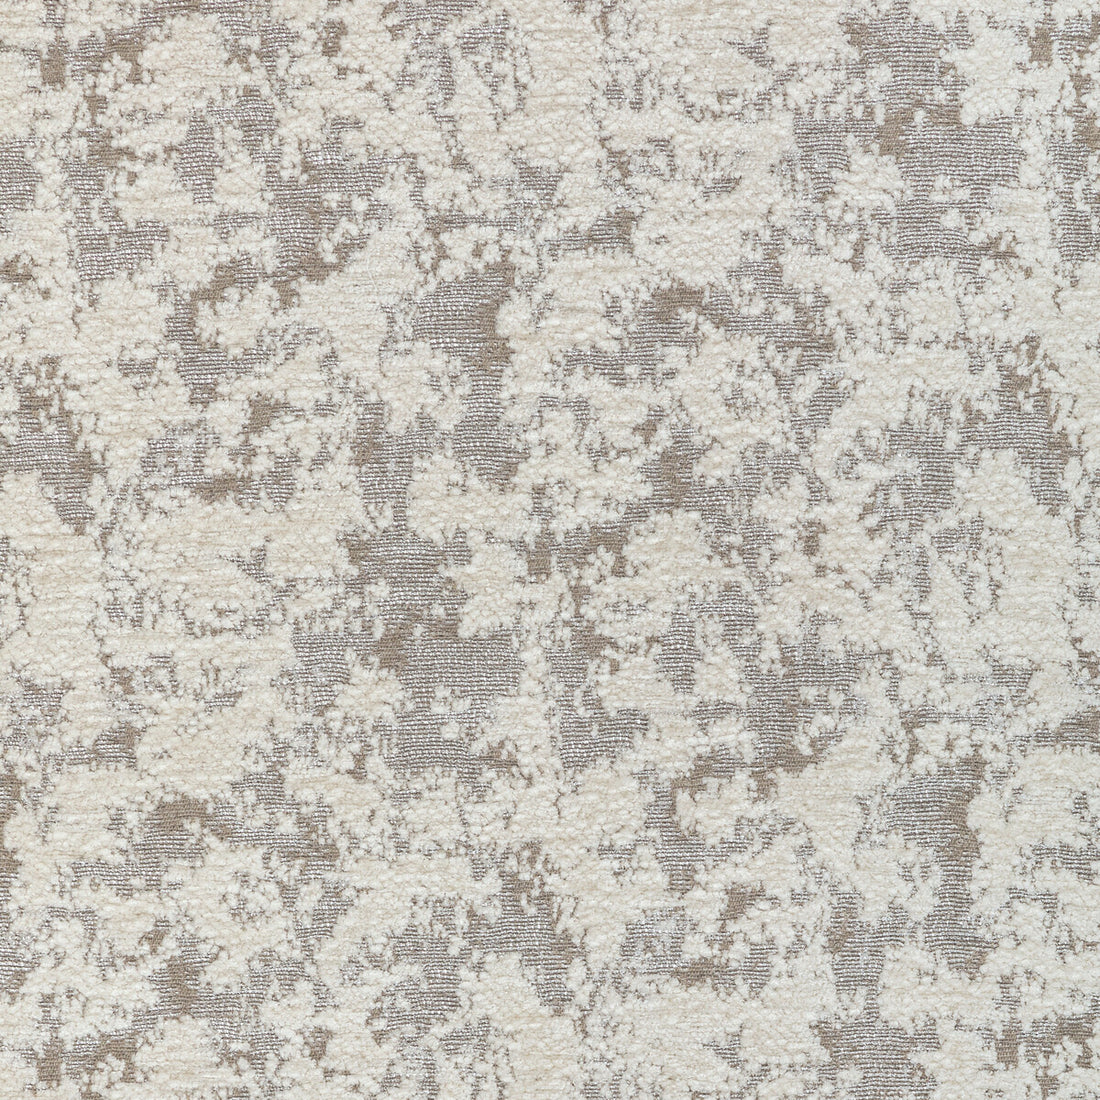 Illumine fabric in pewter color - pattern 36355.11.0 - by Kravet Couture in the Modern Luxe III collection